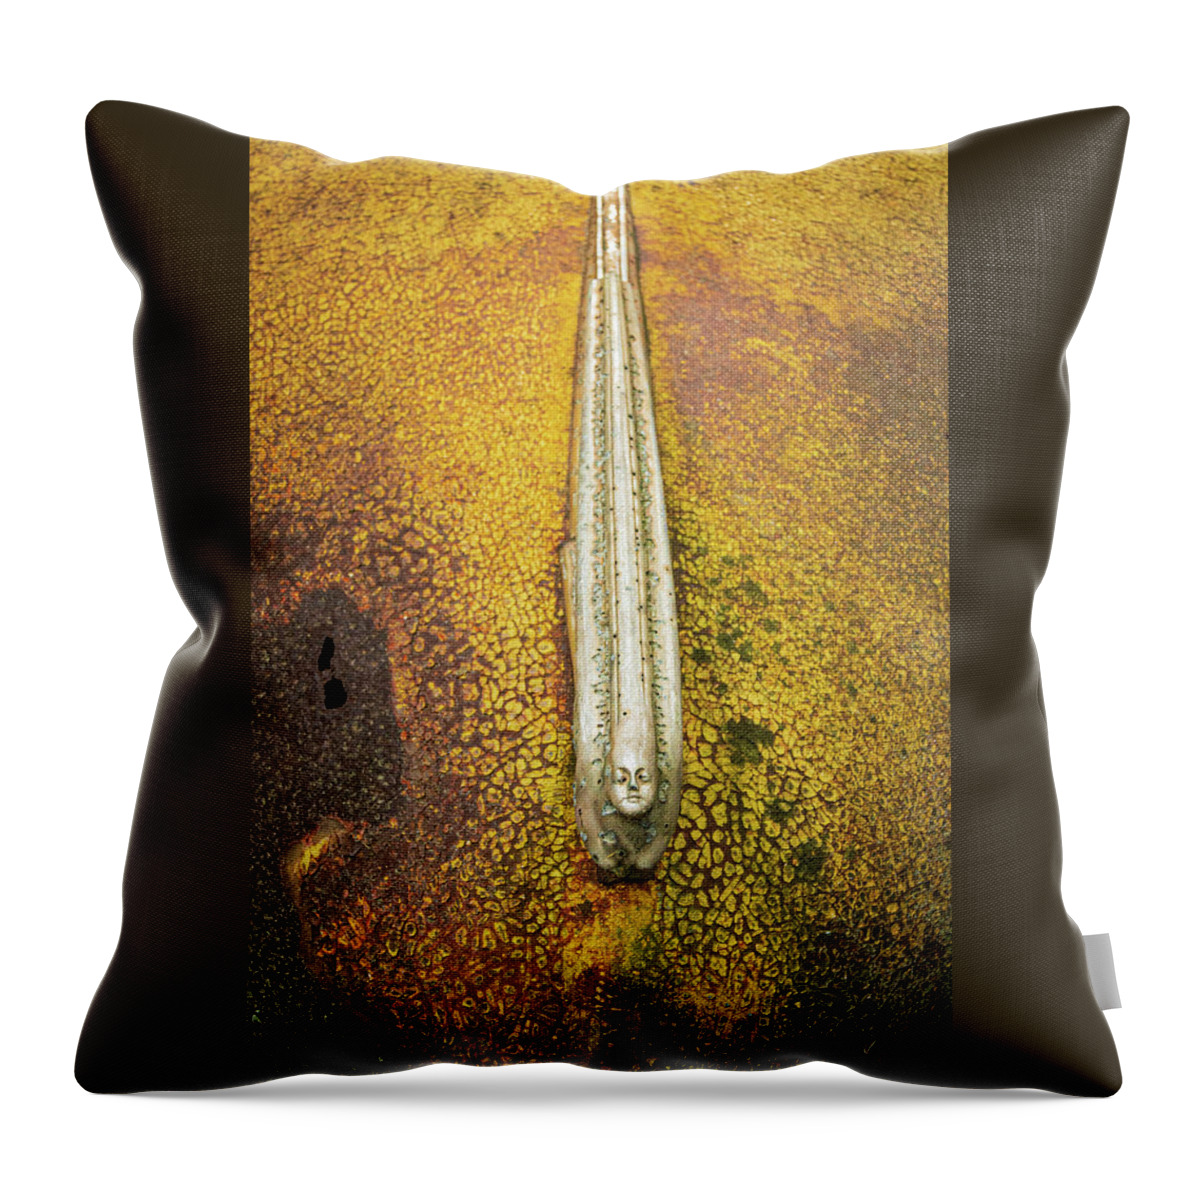 Desoto Throw Pillow featuring the photograph Desoto Flying Goddess by Kristia Adams